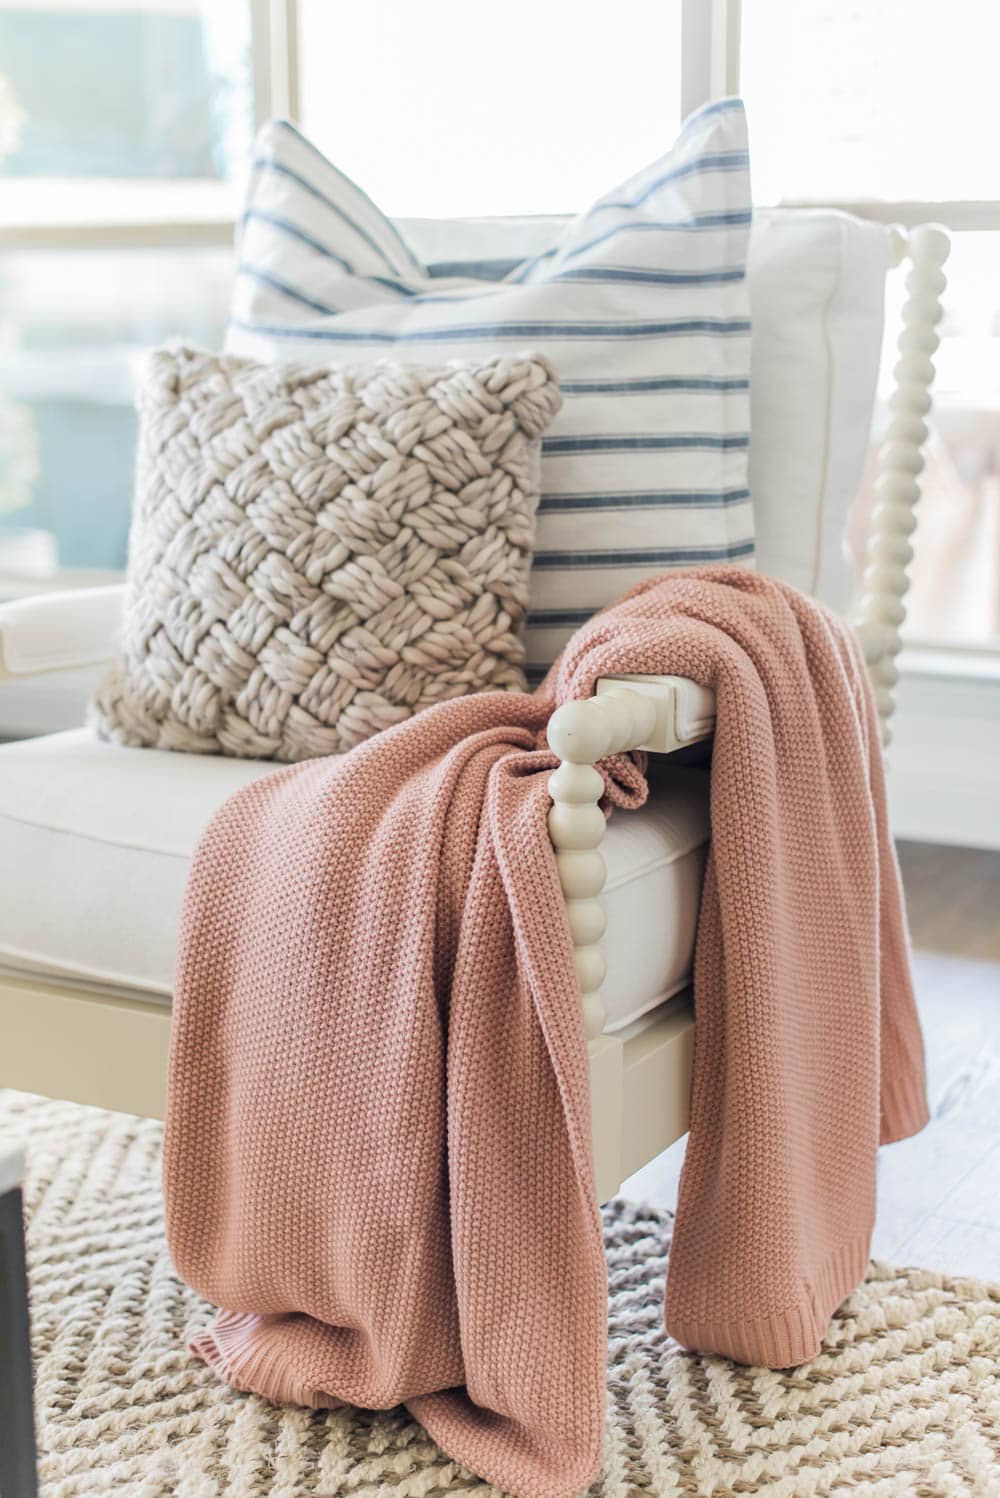 Add beautiful lightweight throw blankets to your living room for effortless spring decorating ideas. #ABlissfulNest #springideas #springdecorating 